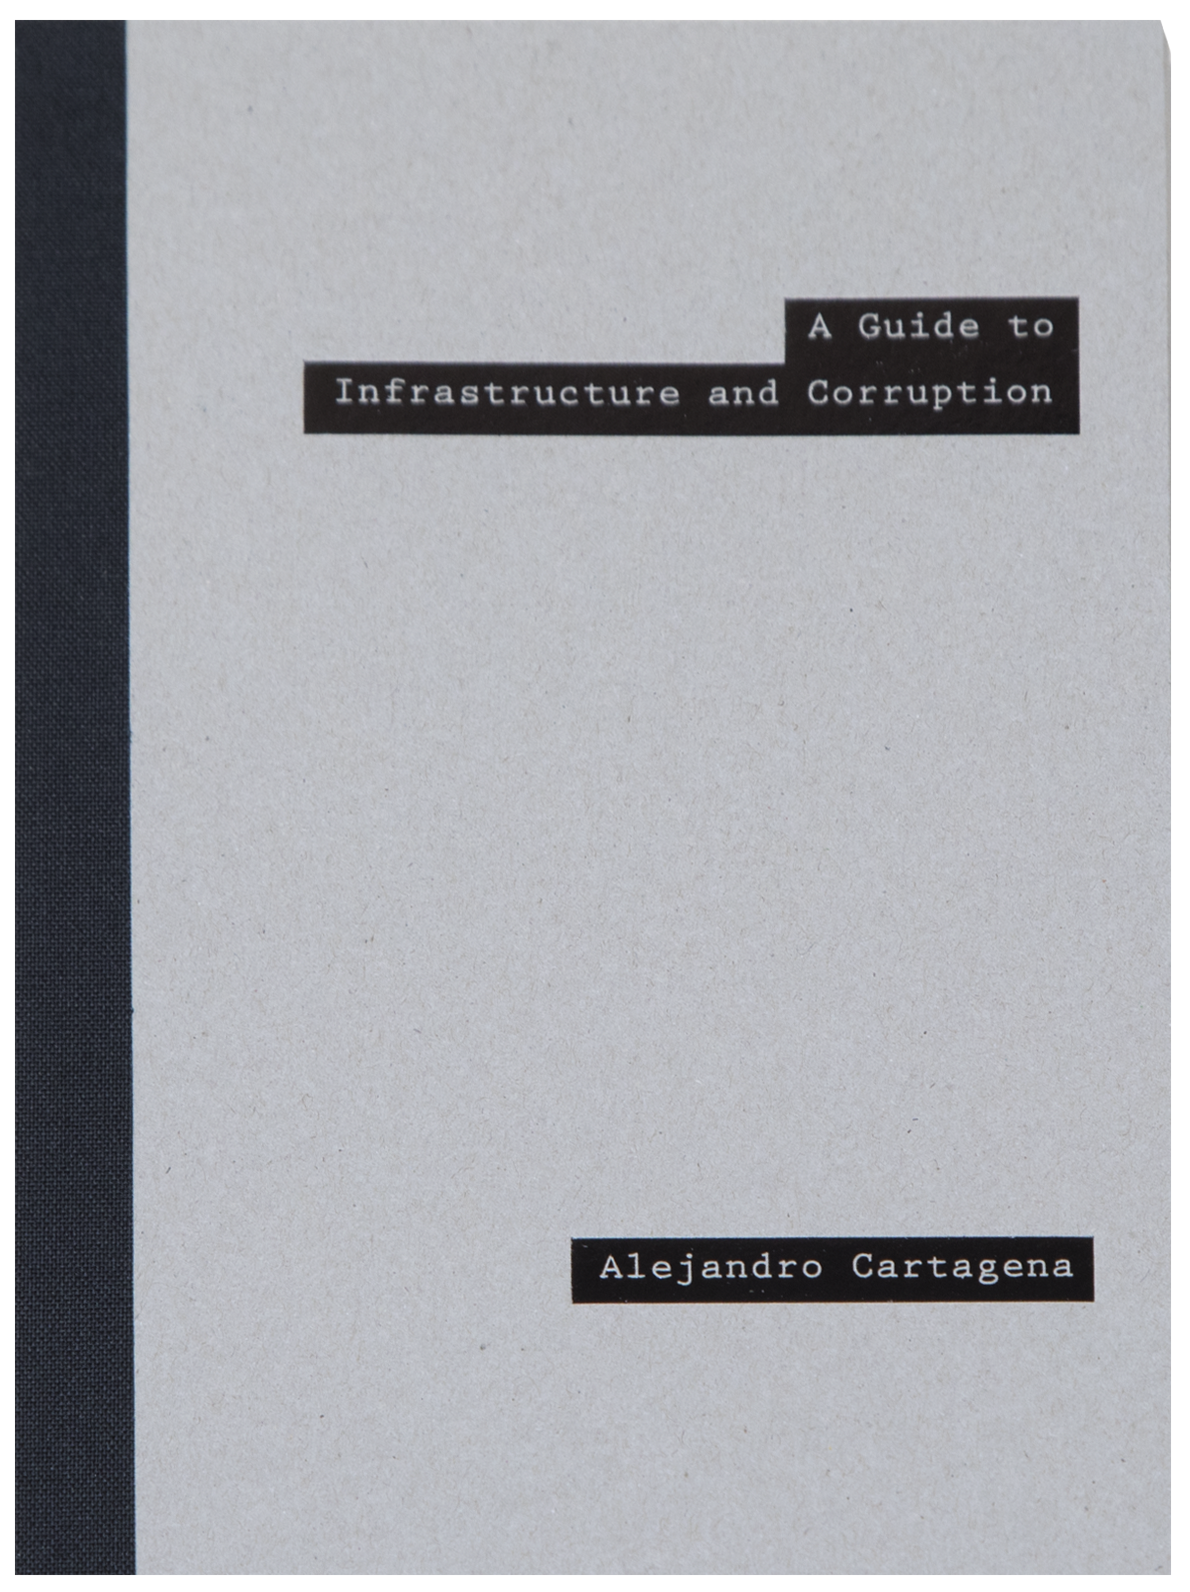 A Guide to Infrastructure and Corruption